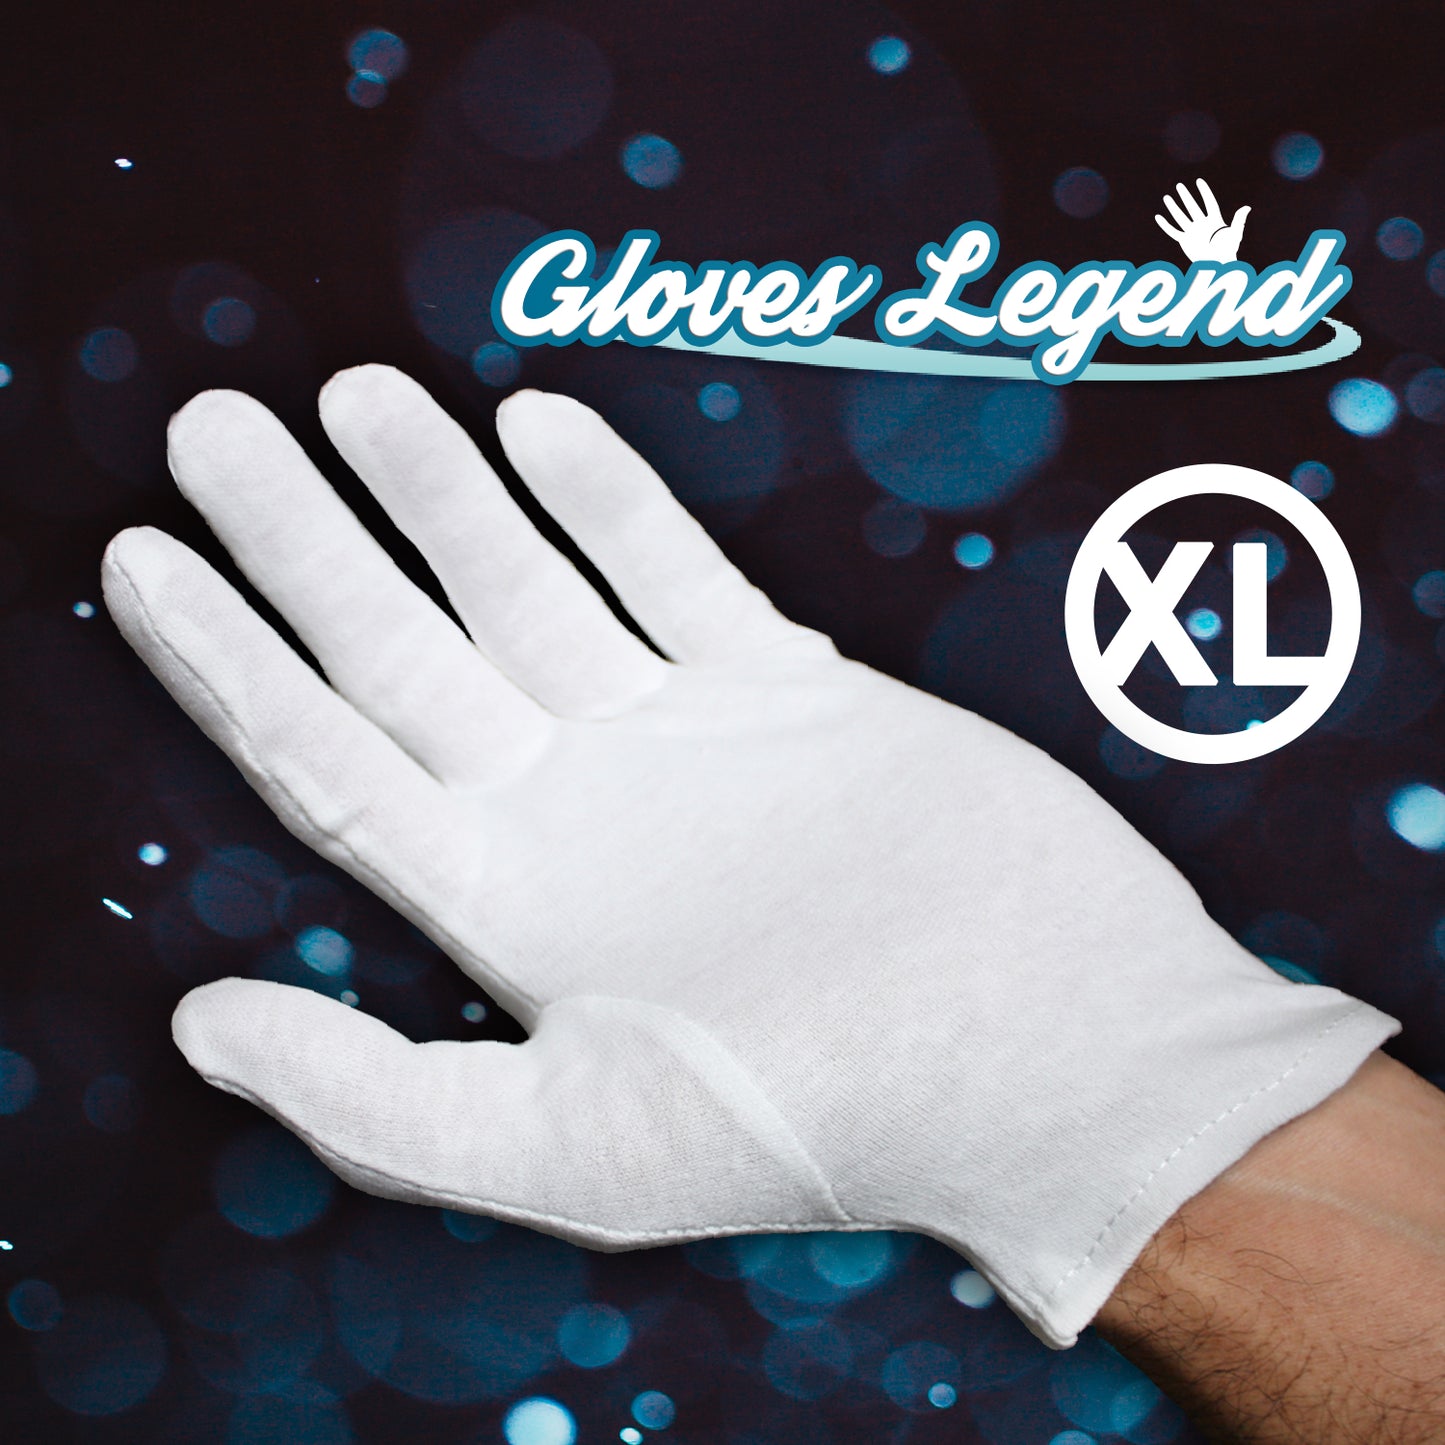 XL - 6 Pairs (12 Gloves) - Gloves Legend White Cotton Moisturizing Parade Jewelry Silver Costumes Inspection Gloves